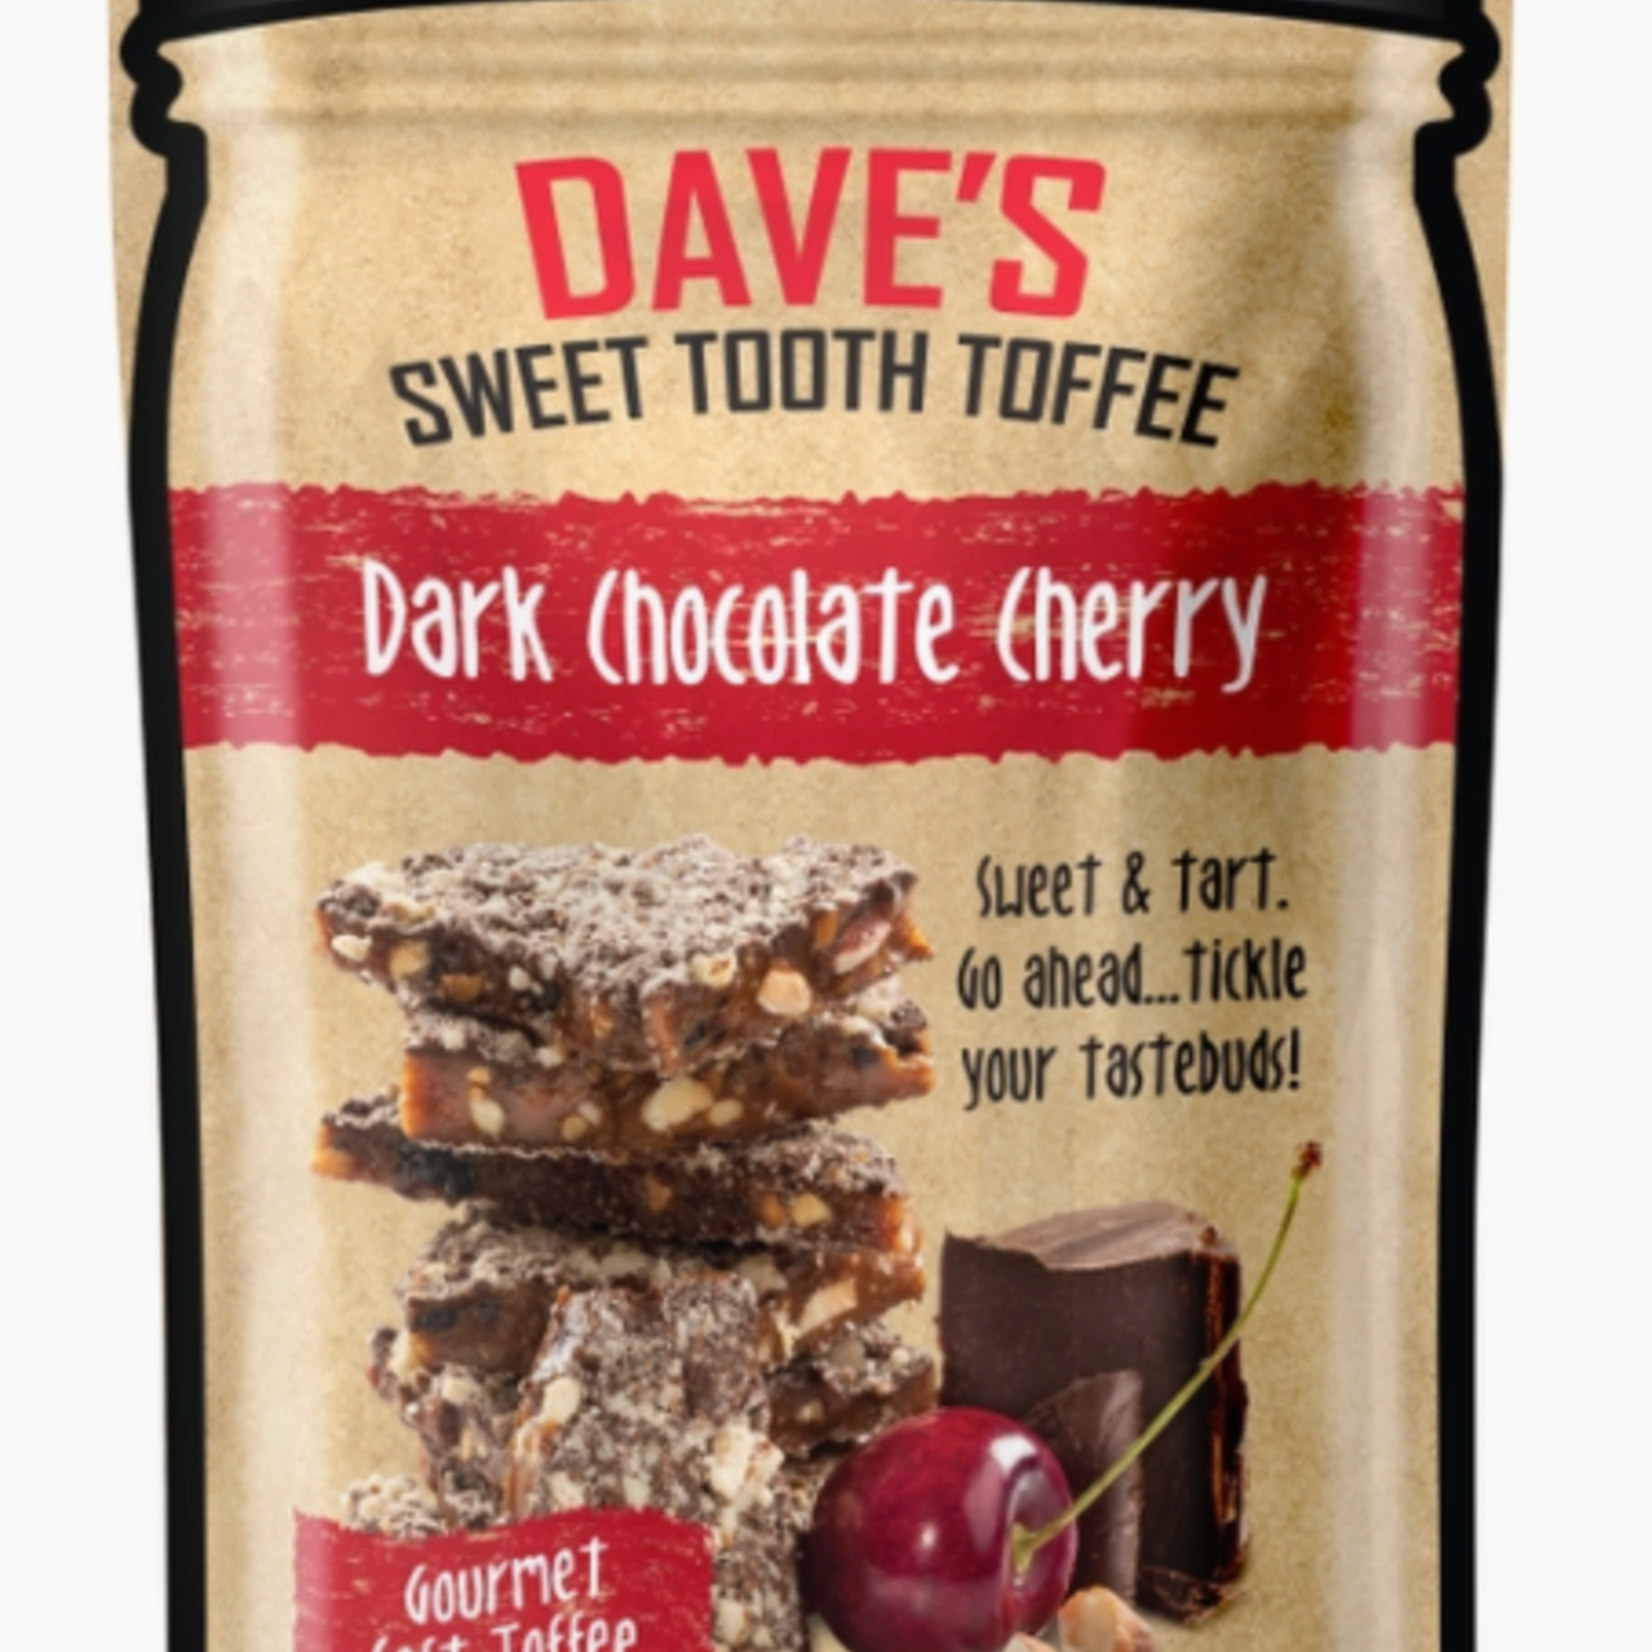 Dave's Sweet Tooth Toffee Dark Chocolate Cherry